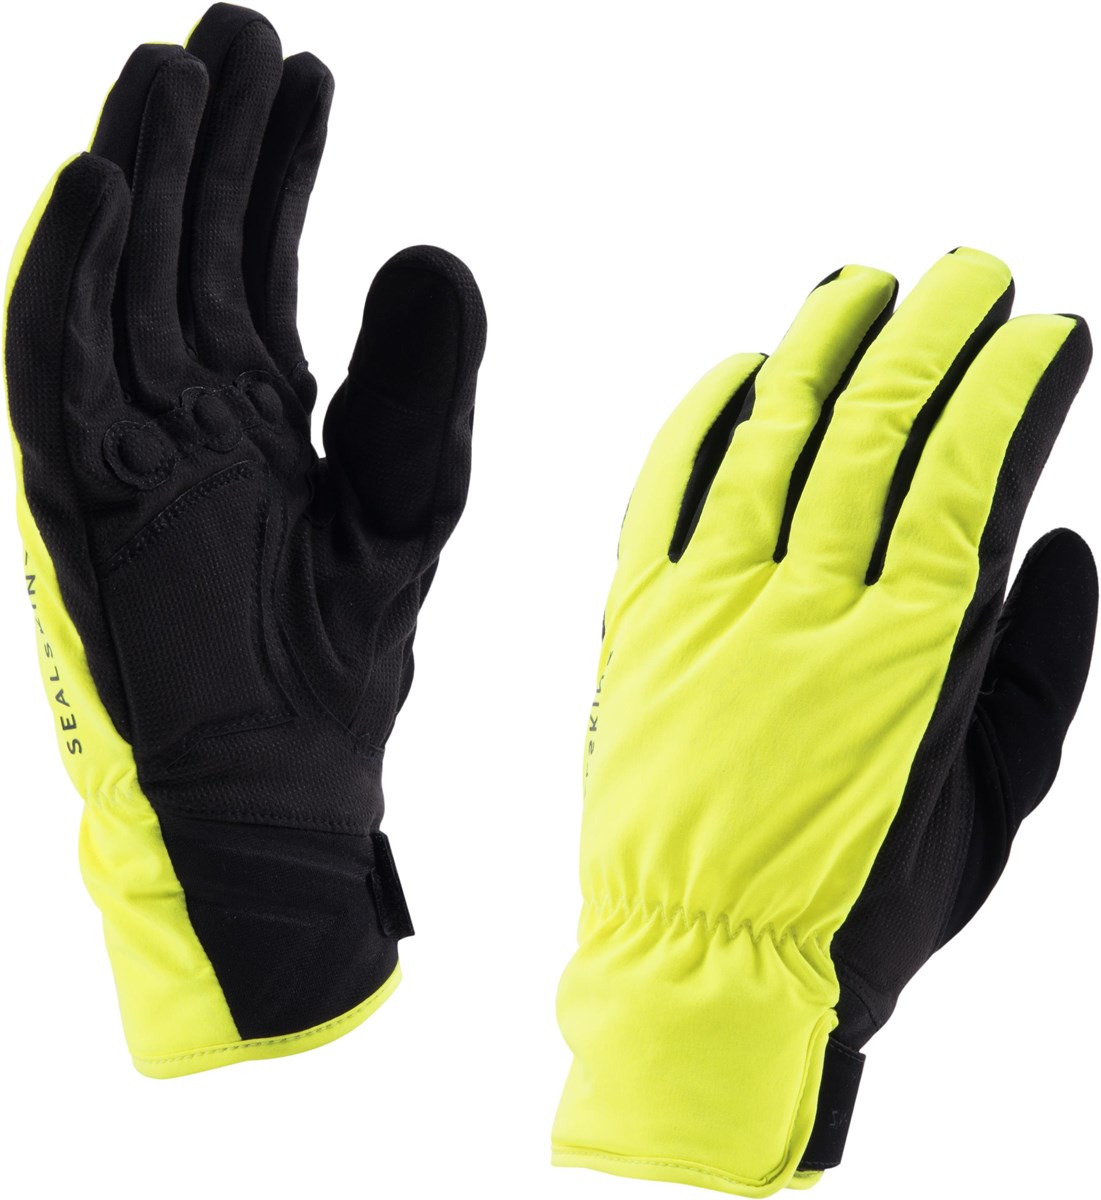 SealSkinz Brecon Long Finger Cycling Gloves